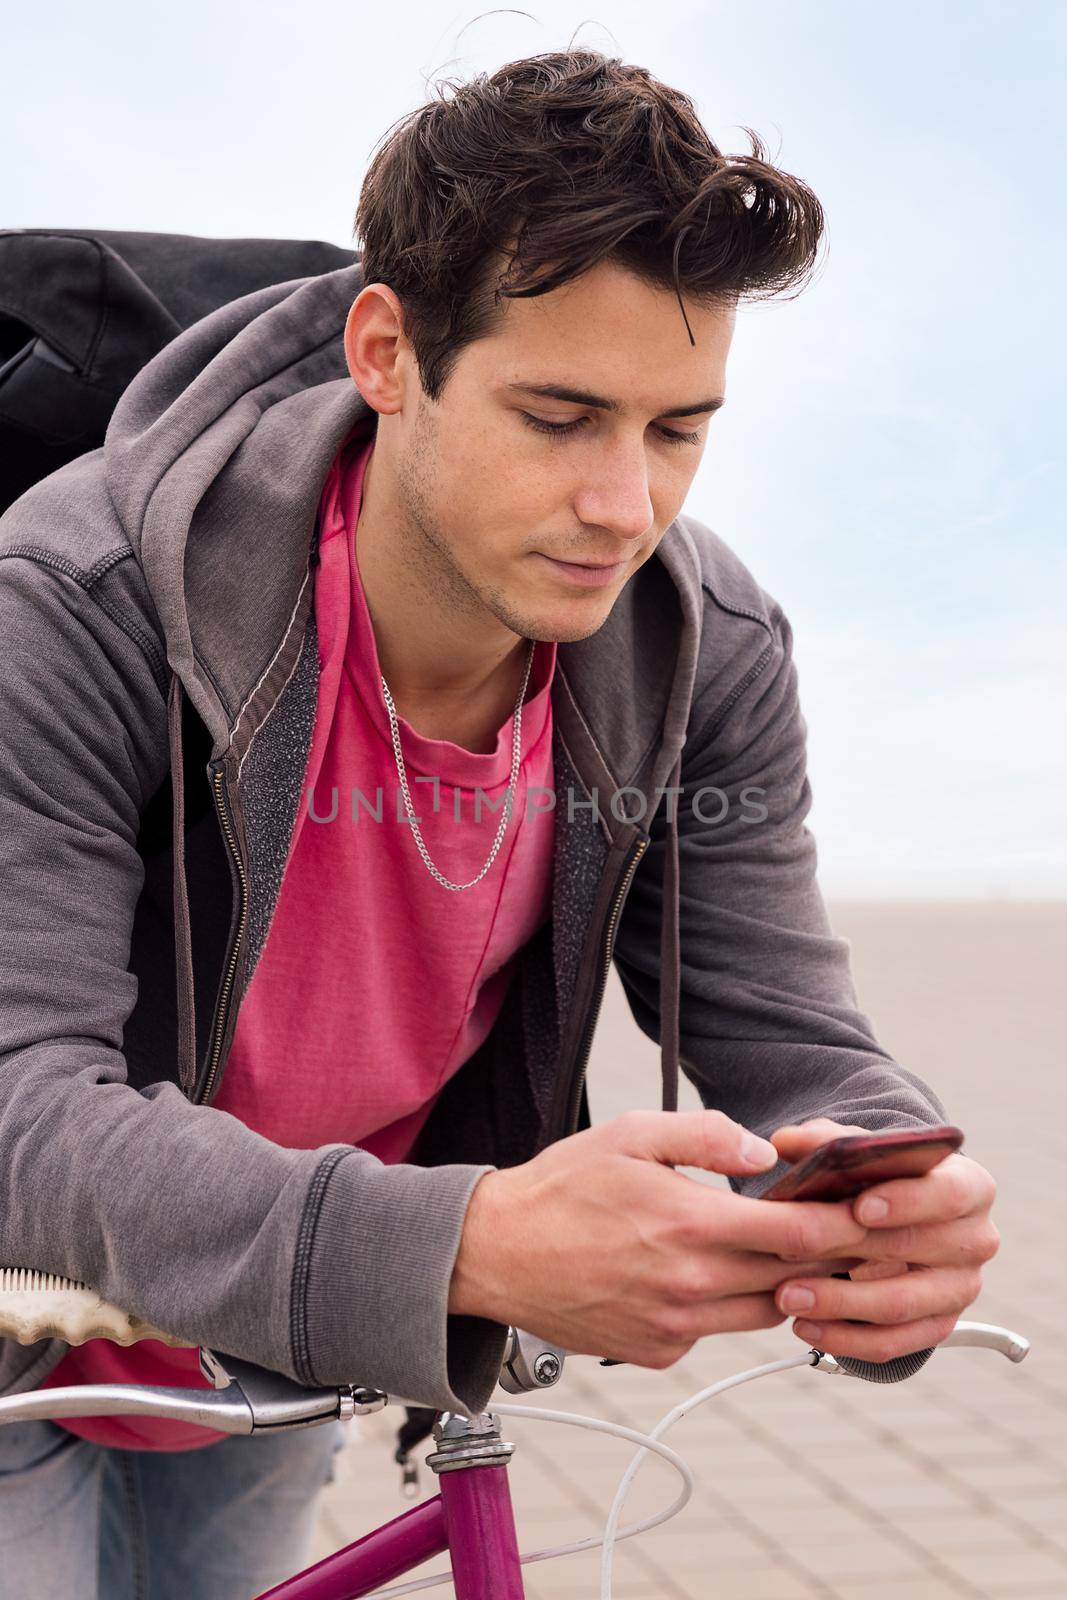 young man leaning on a bike using smart phone by raulmelldo